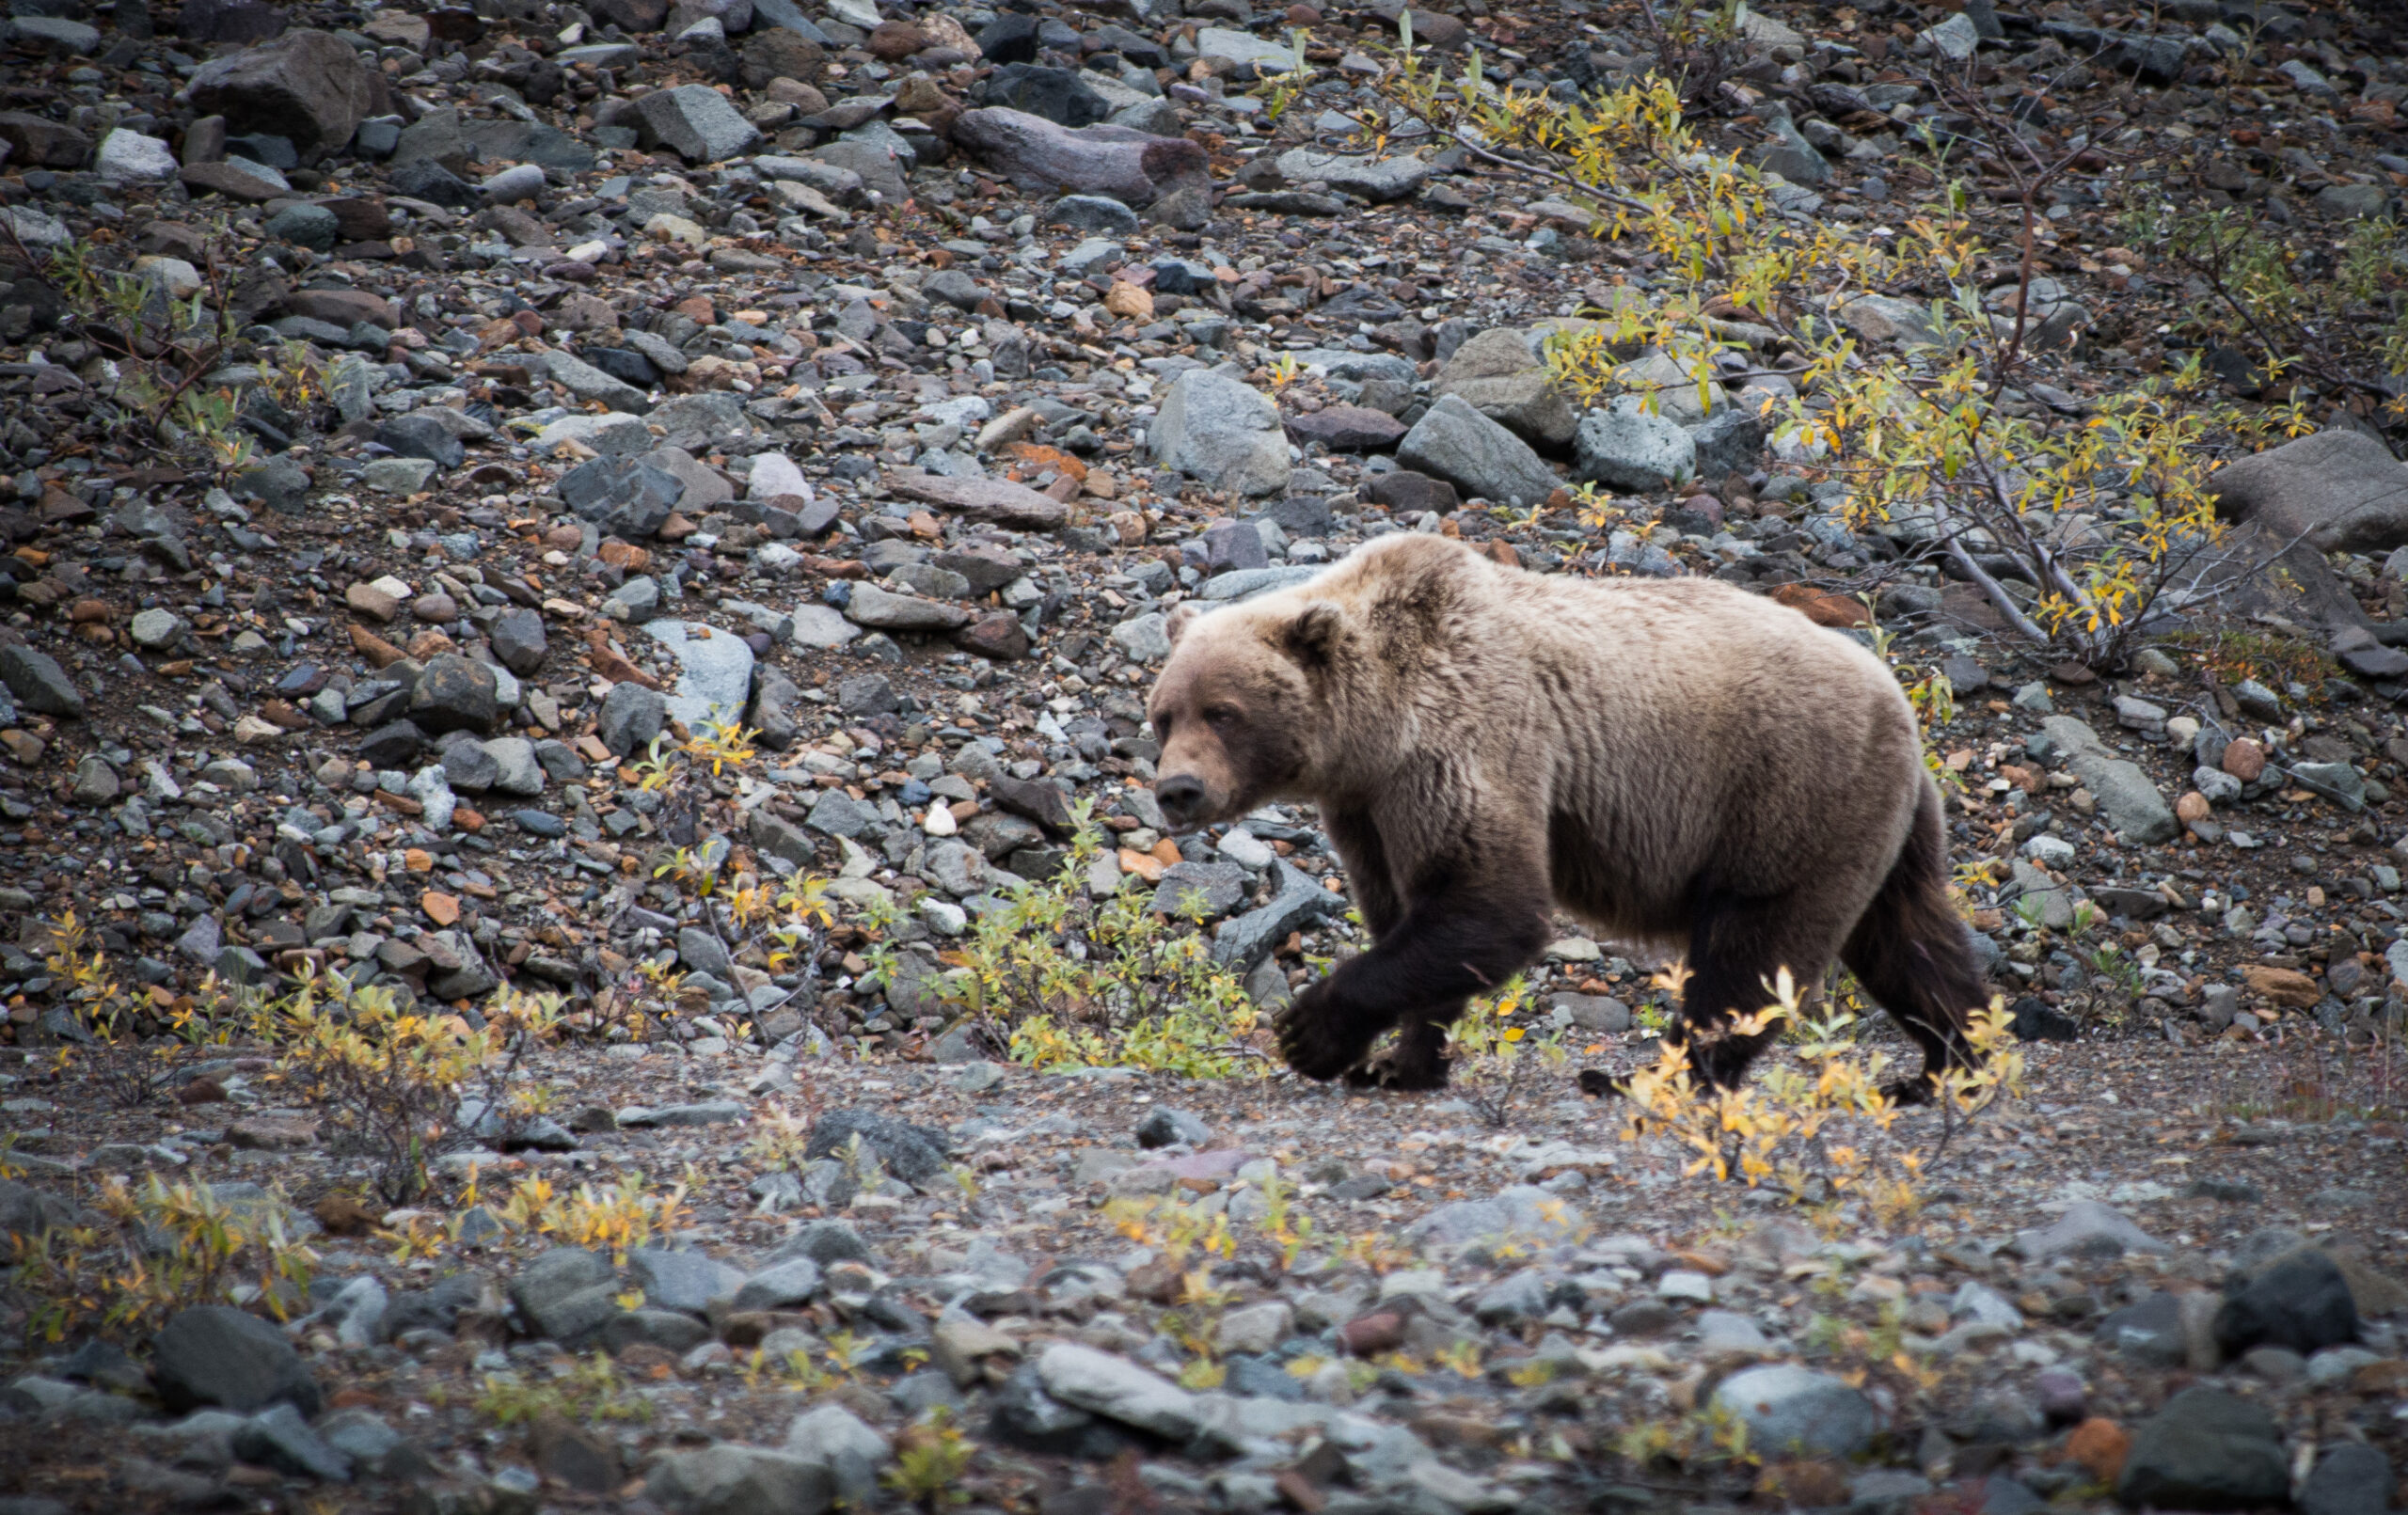 A grizzly carnivore walks complete rocks